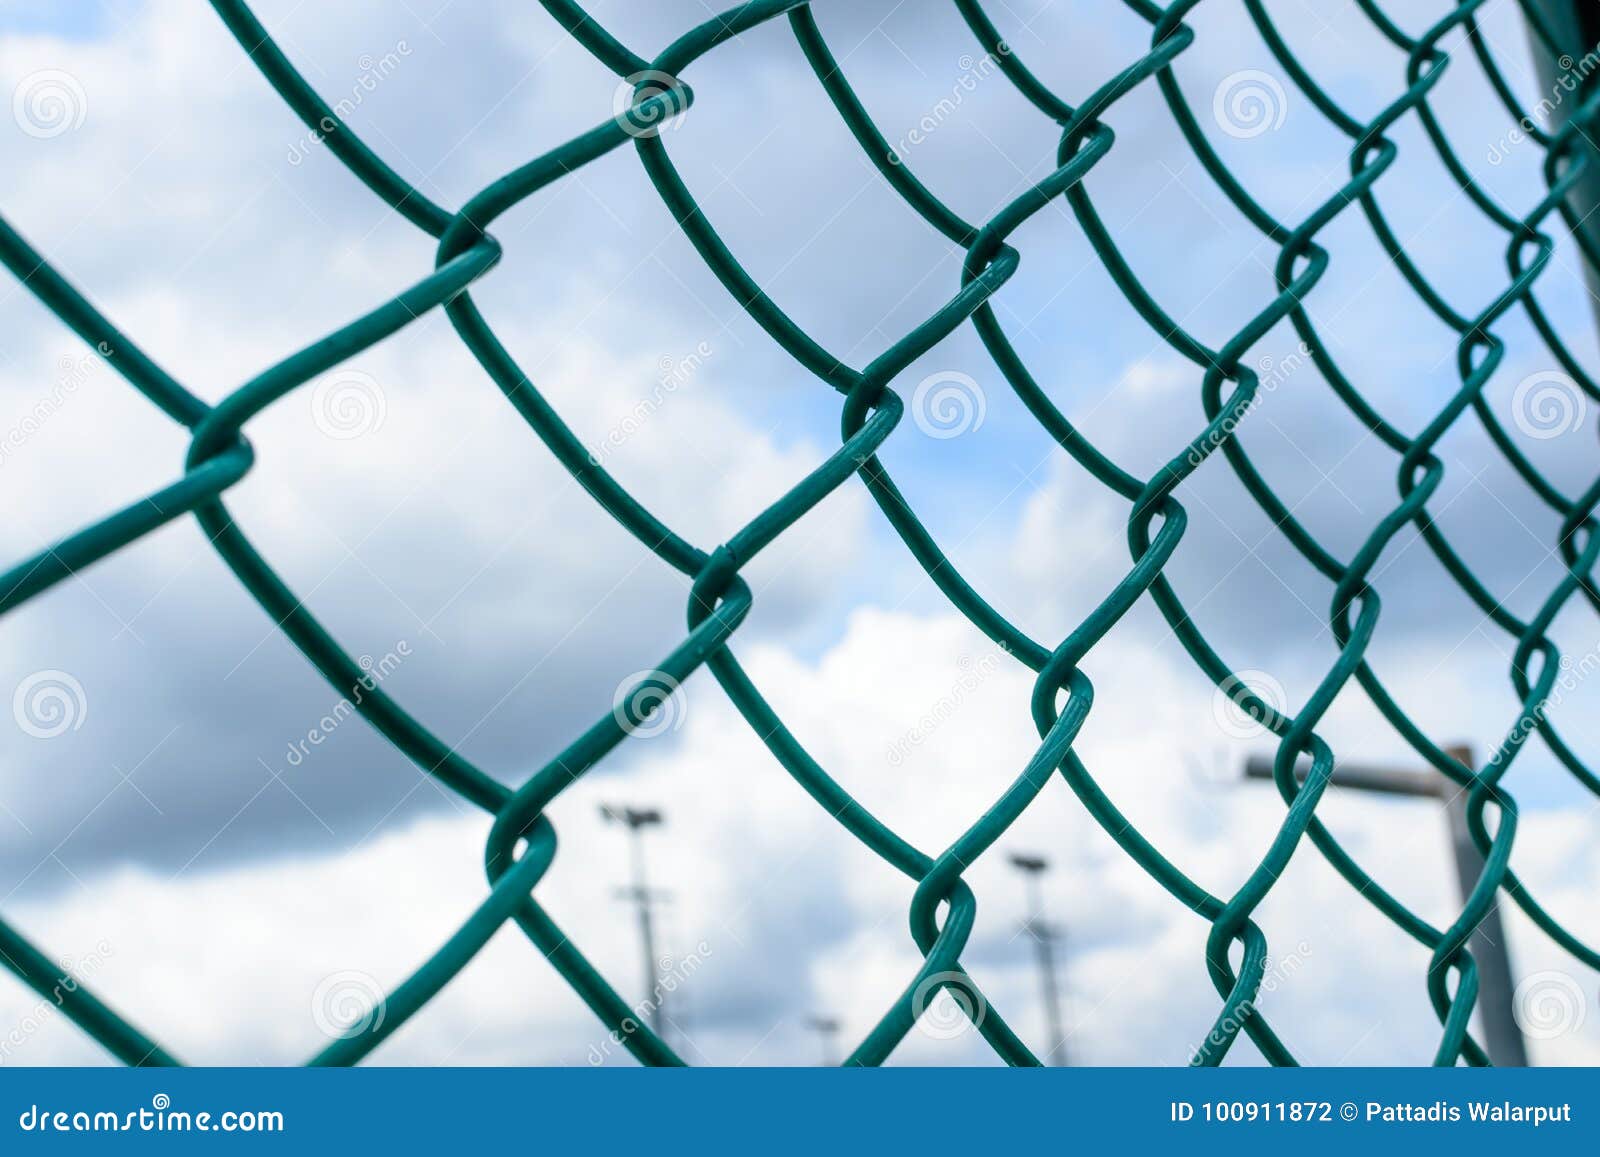 Green metal wire fence stock photo. Image of closeup - 100911872
